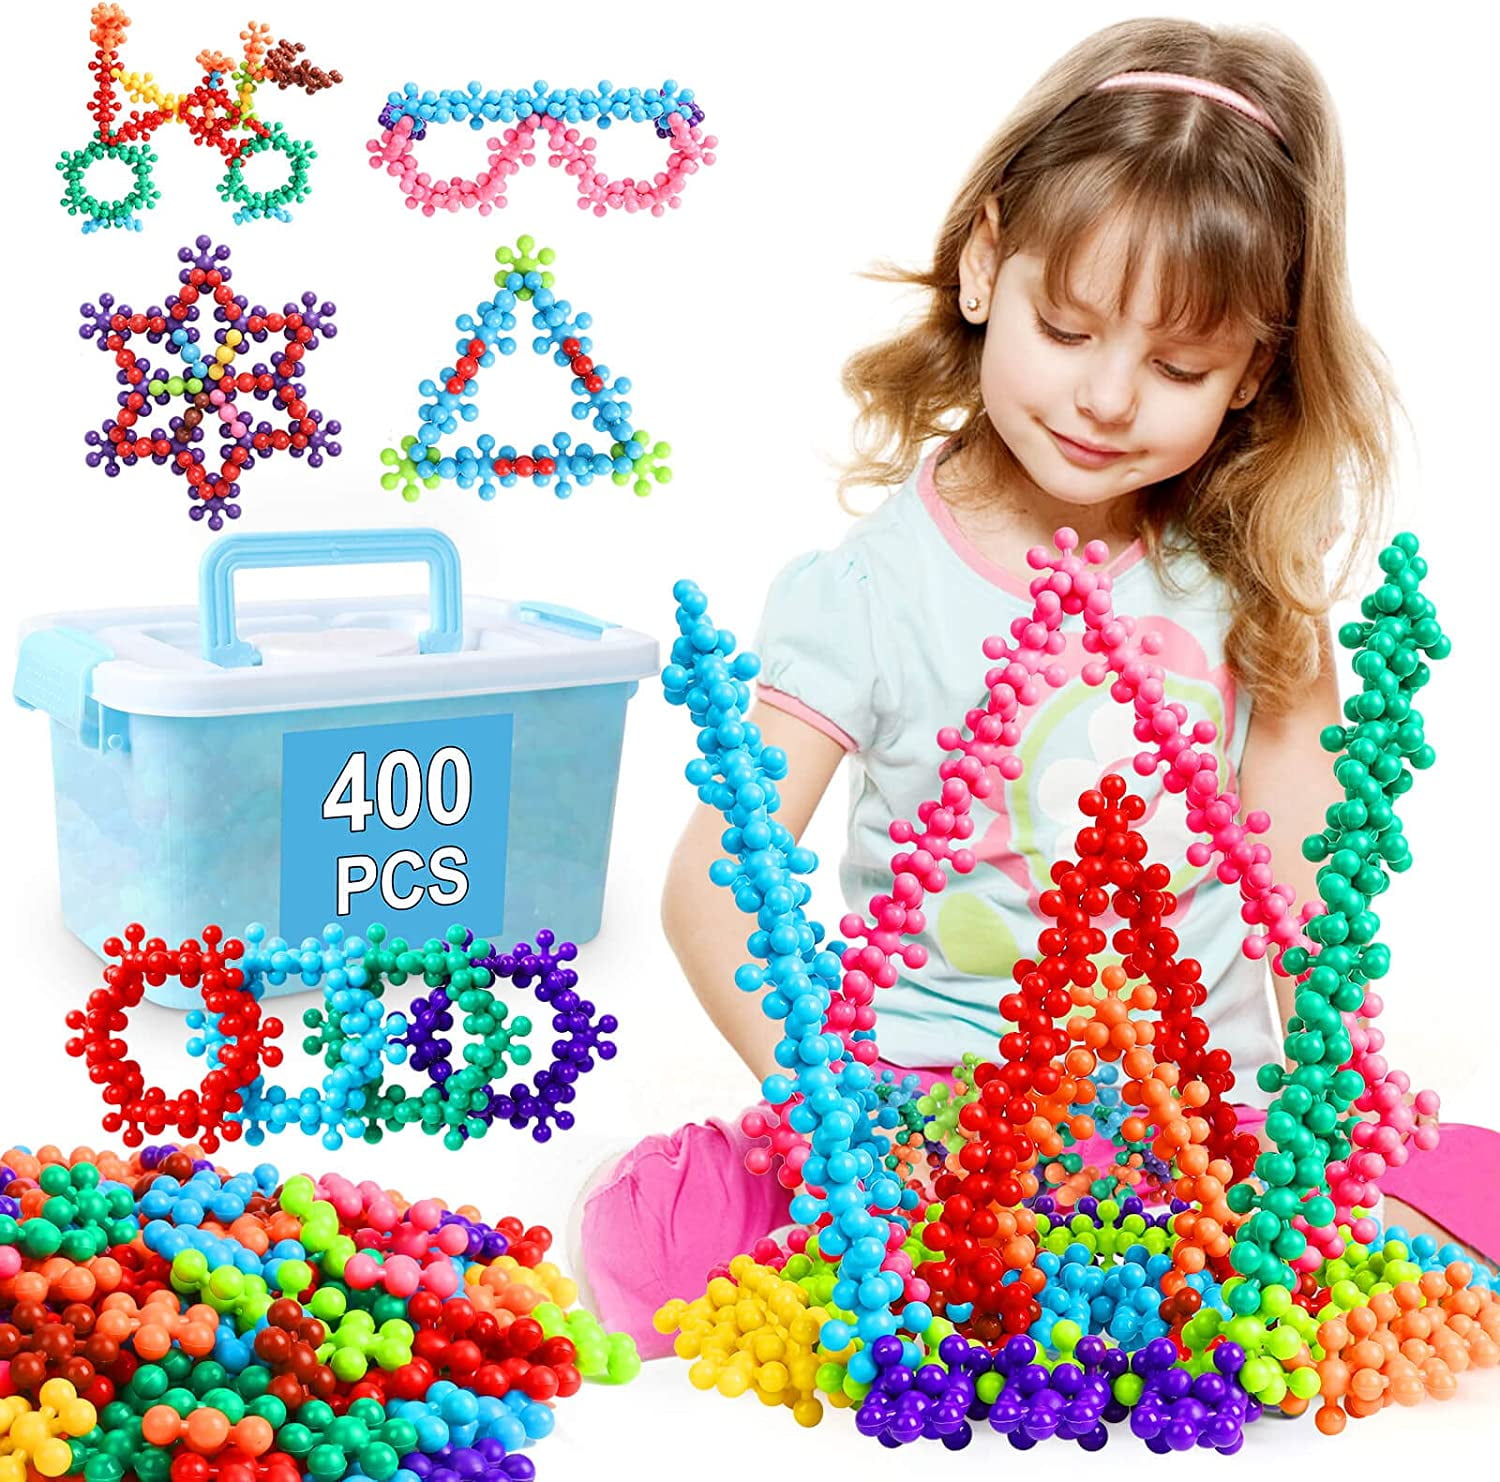 300 pcs Snowflakes sets Connect Interlocking Disc Toy for Kids Puzzle Flakes